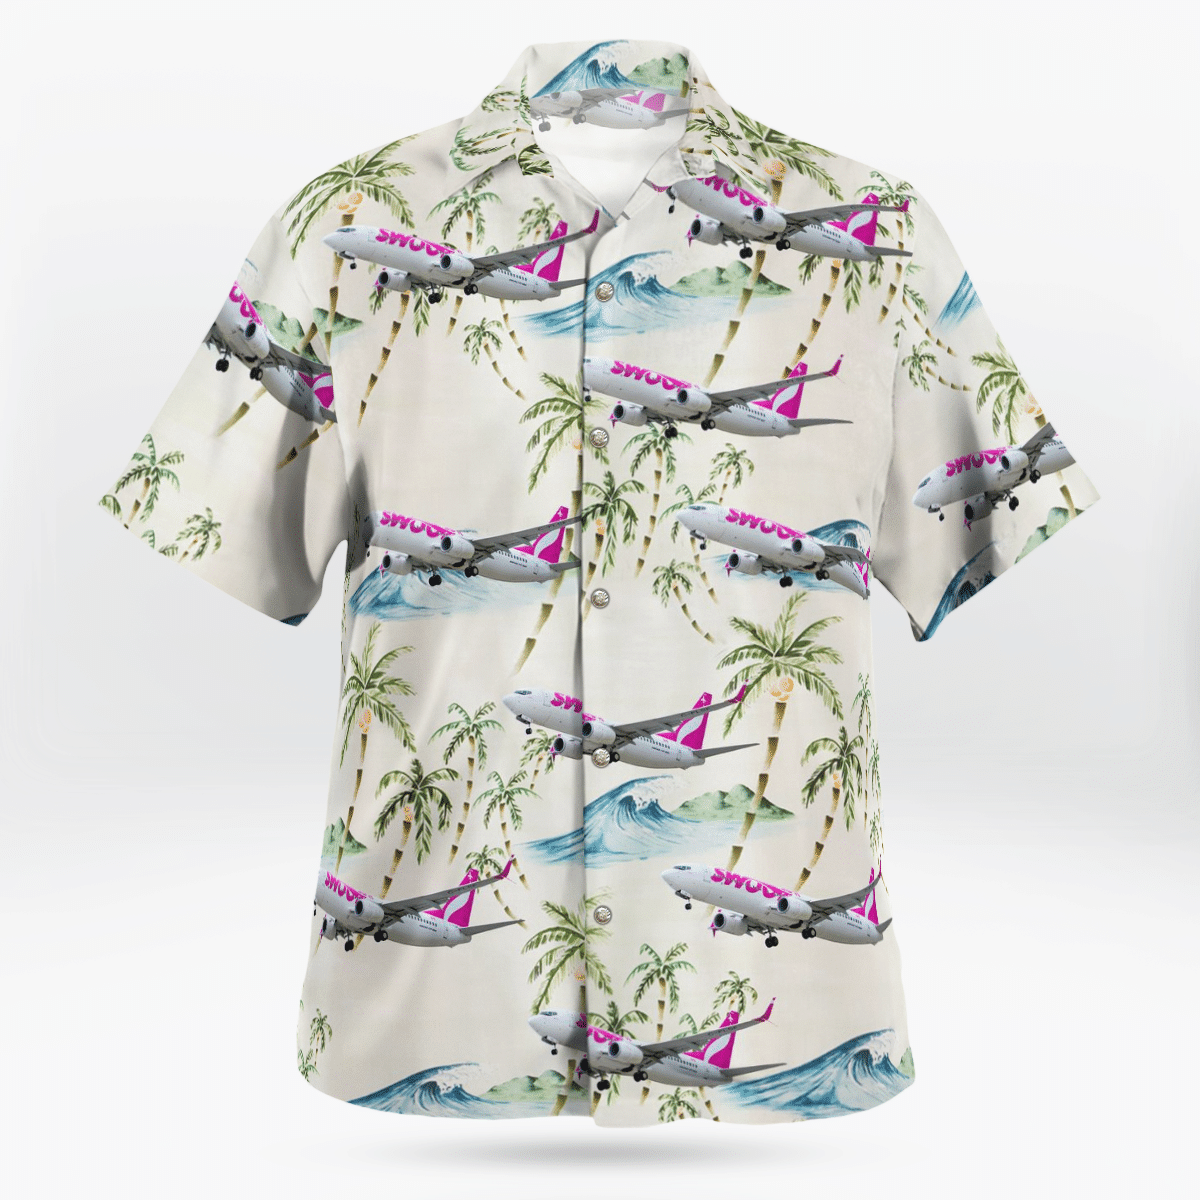 HOT Swoop airline Boeing 737 MAX 8 Tropical Shirt1